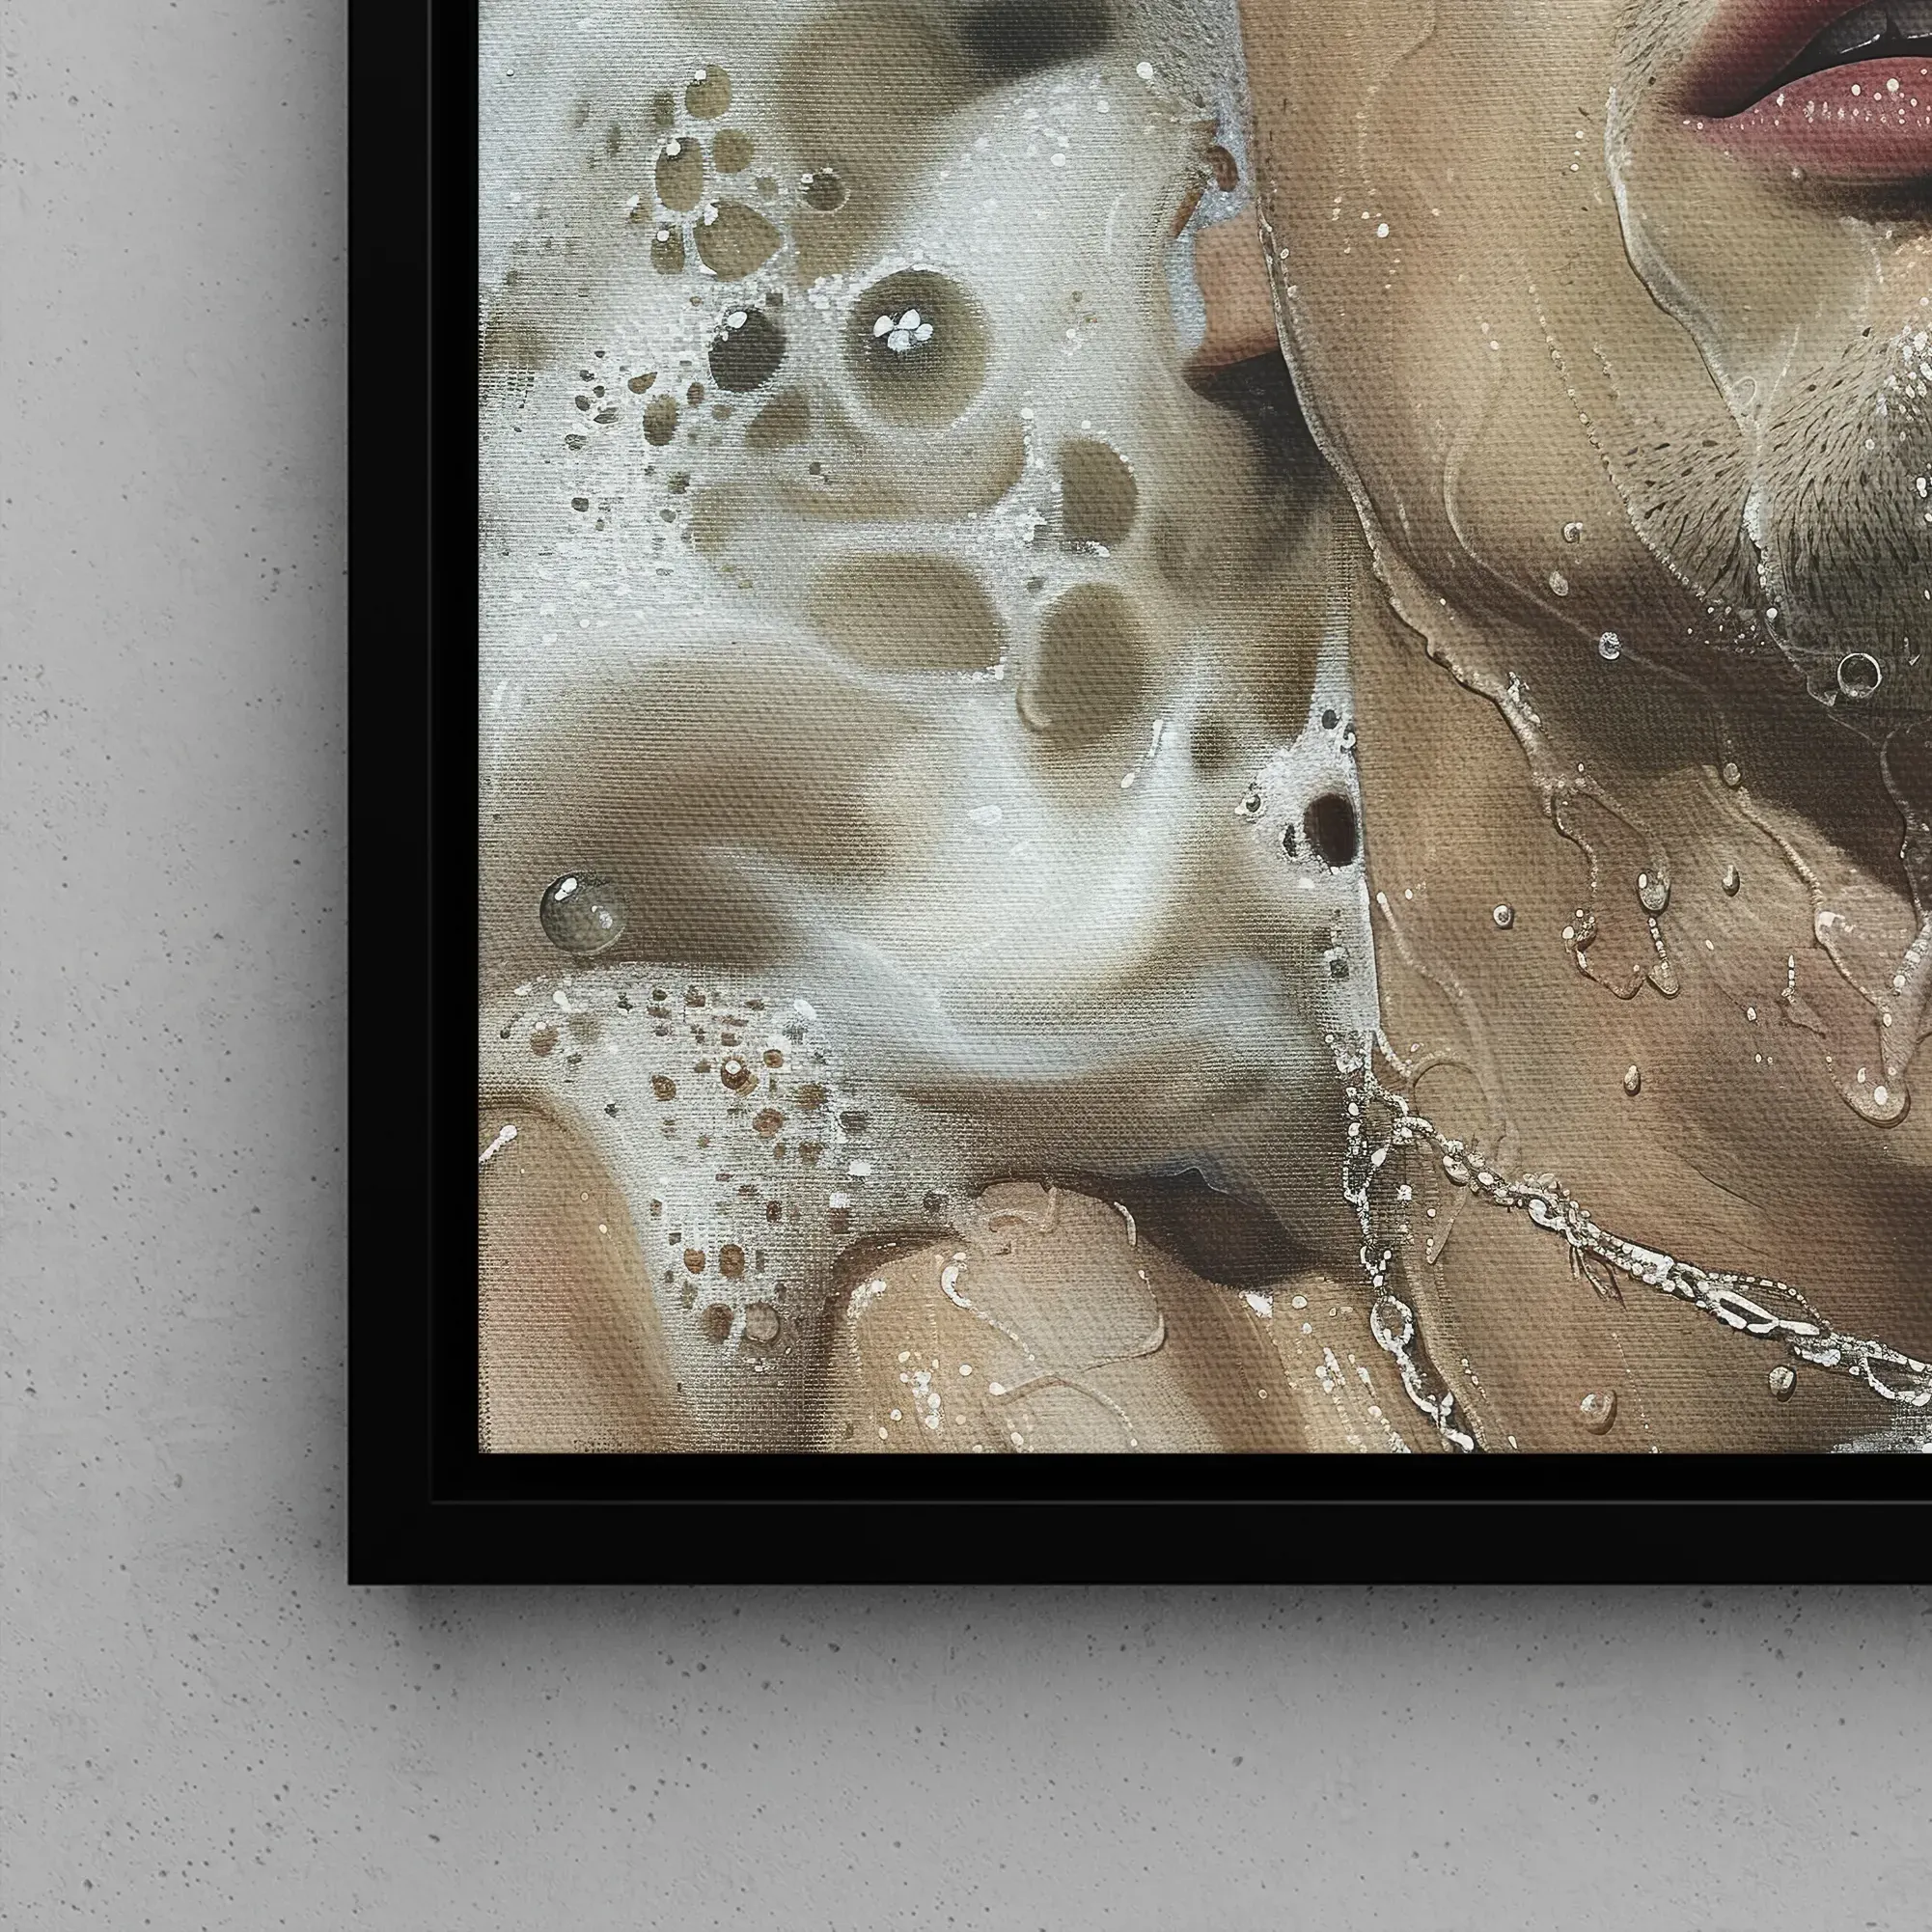 Wet Whistle - Latino Homoerotic Float Frame Canvas - Posters Prints & Visual Artwork - Aesthetic Art